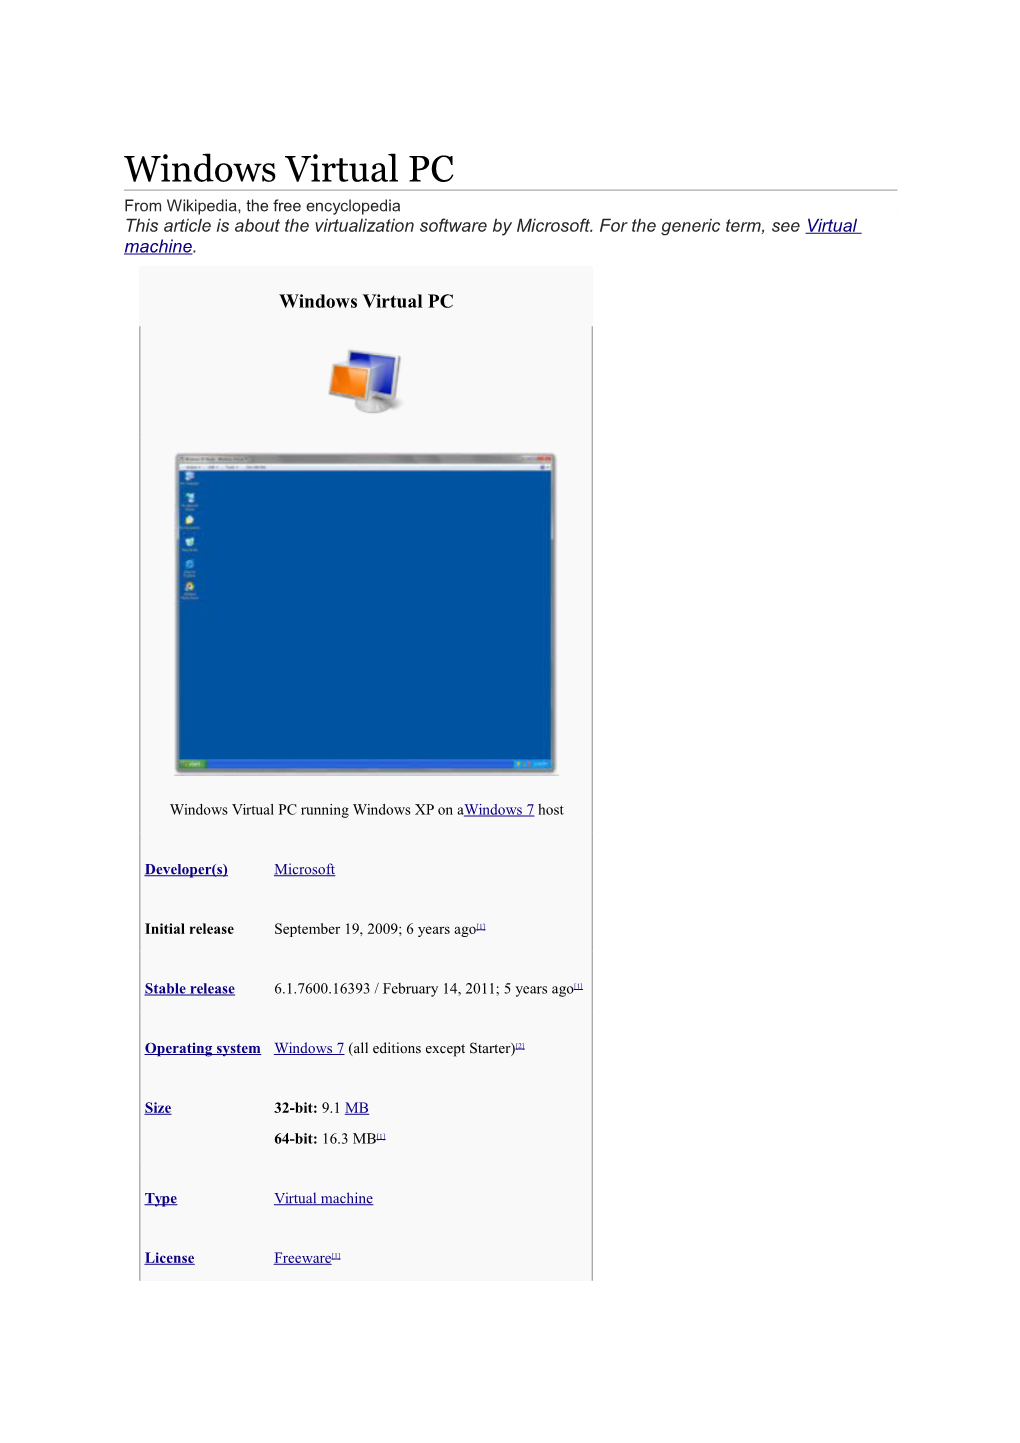 Windows Virtual PC from Wikipedia, the Free Encyclopedia This Article Is About the Virtualization Software by Microsoft